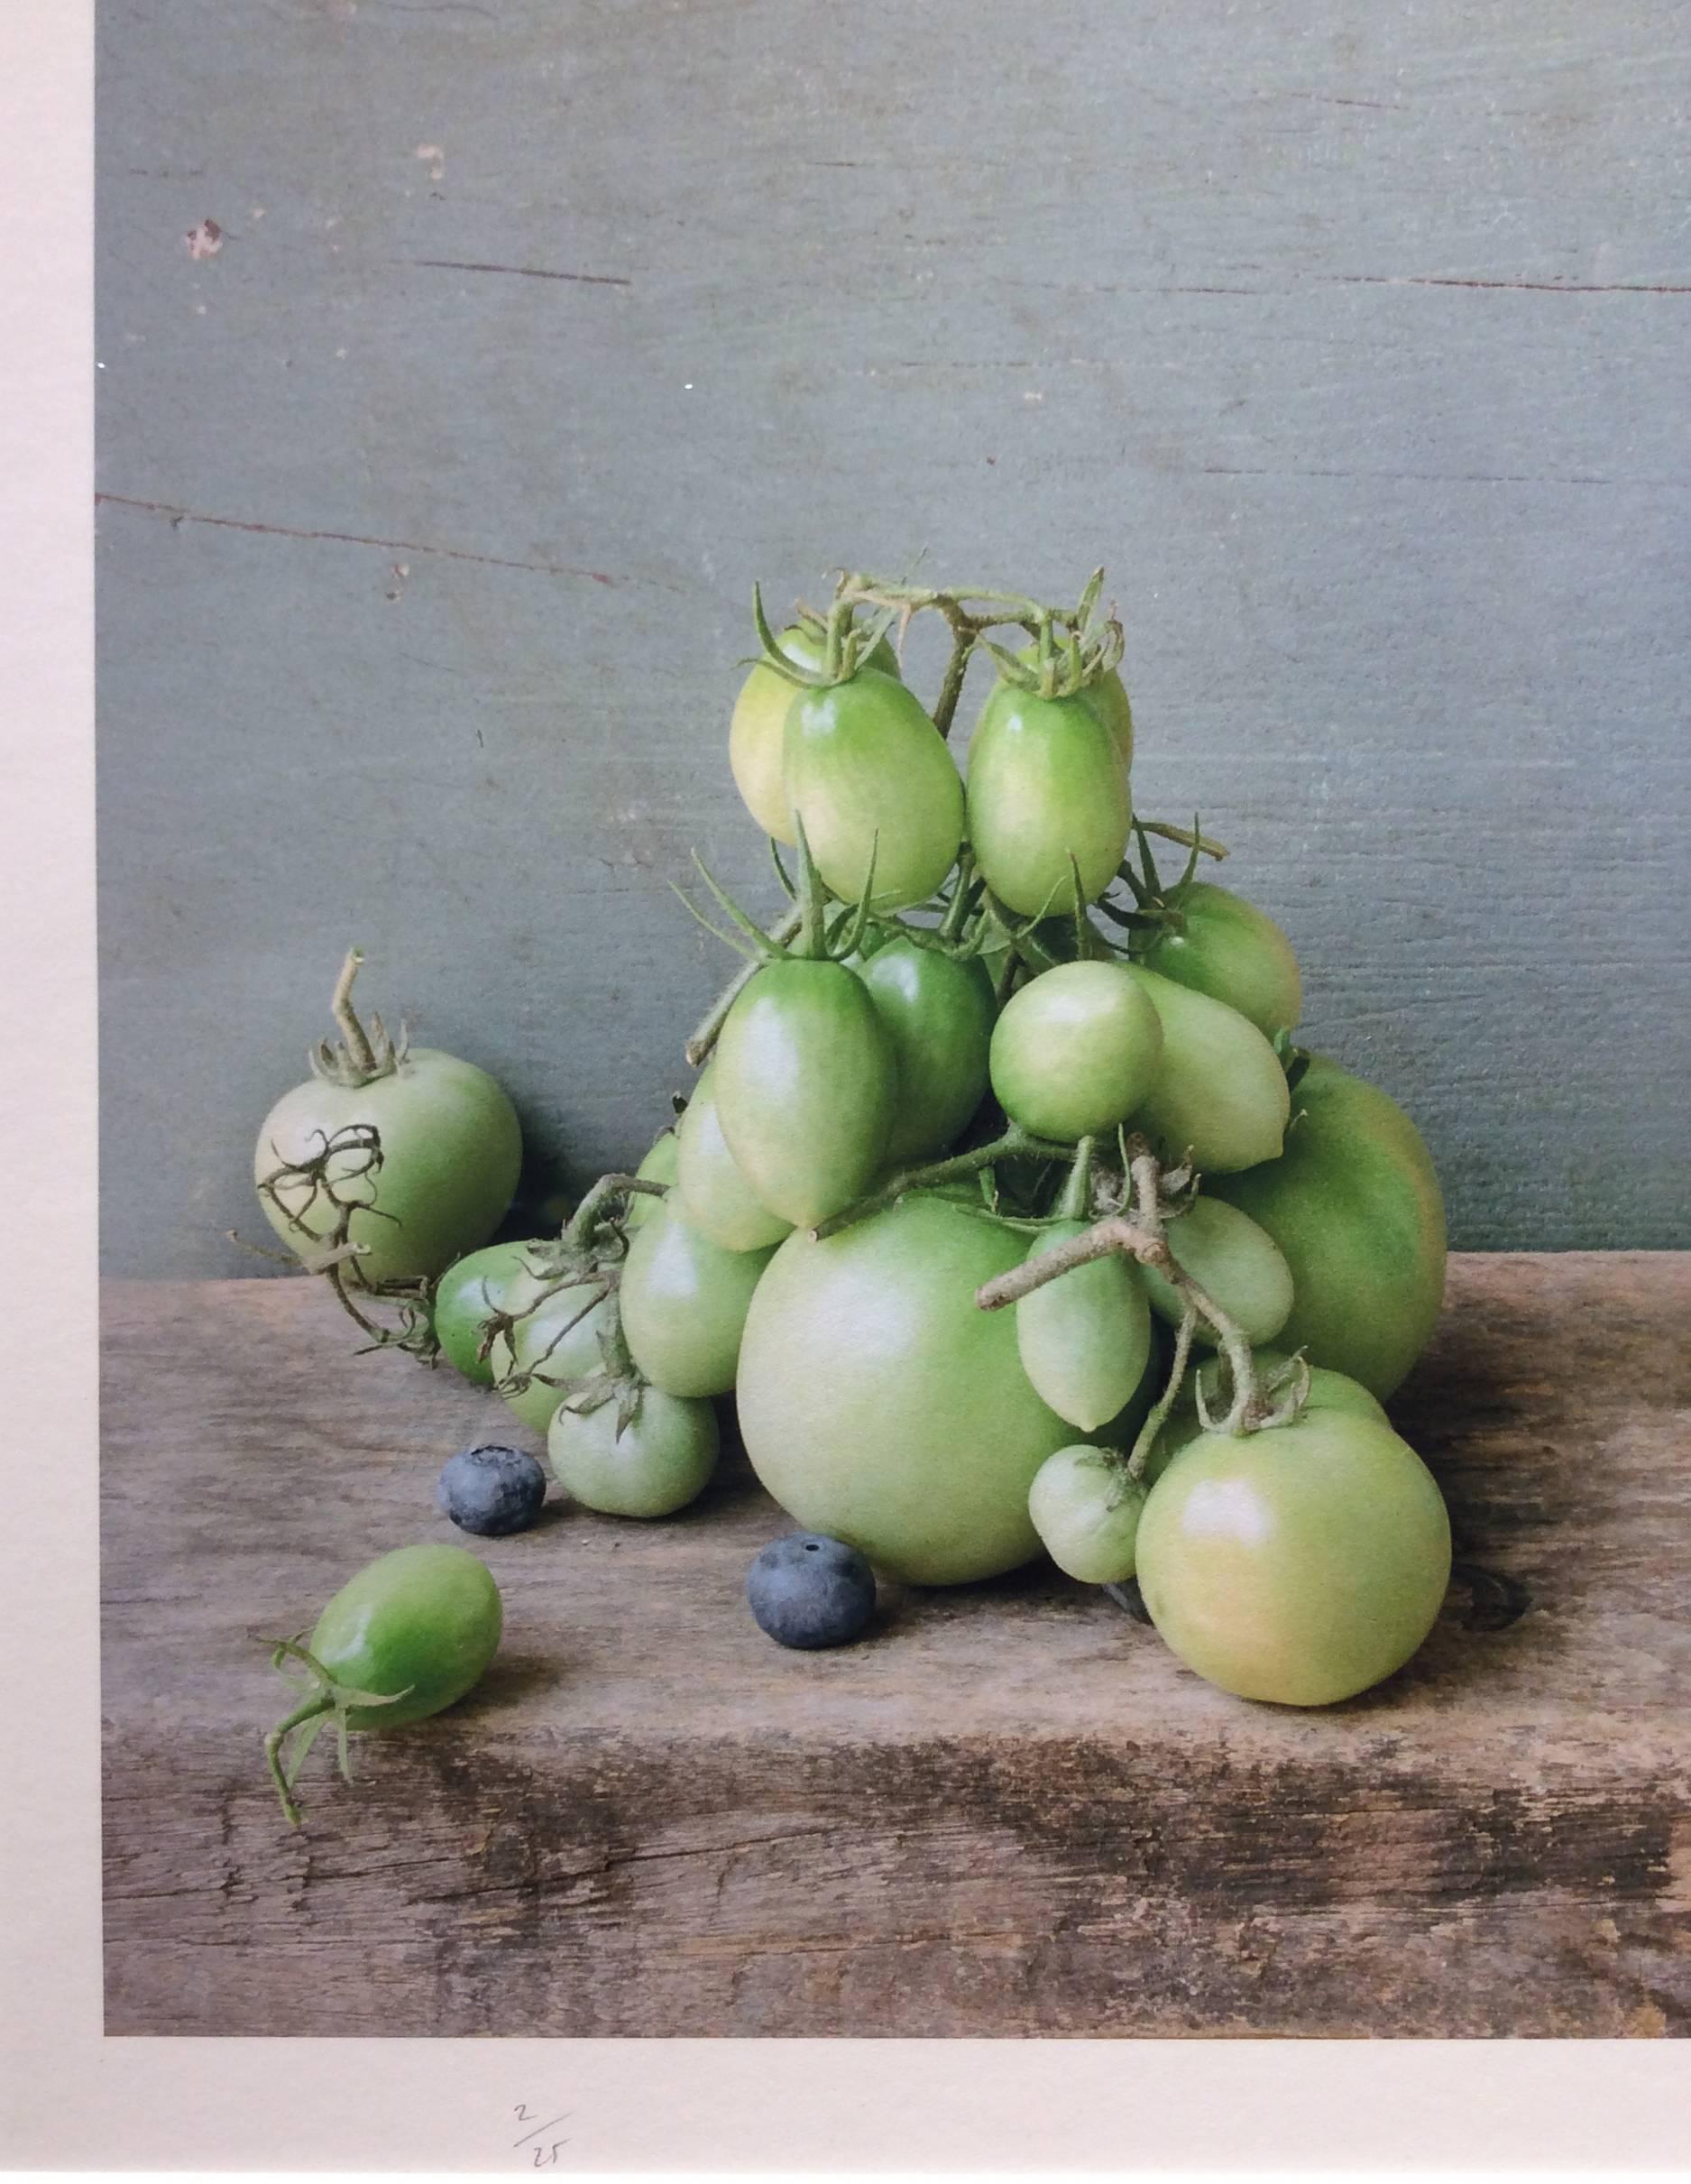 Green Tomatoes & Blueberries: Modern Still Life Photograph of Fruit & Vegetables - Gray Still-Life Photograph by David Halliday